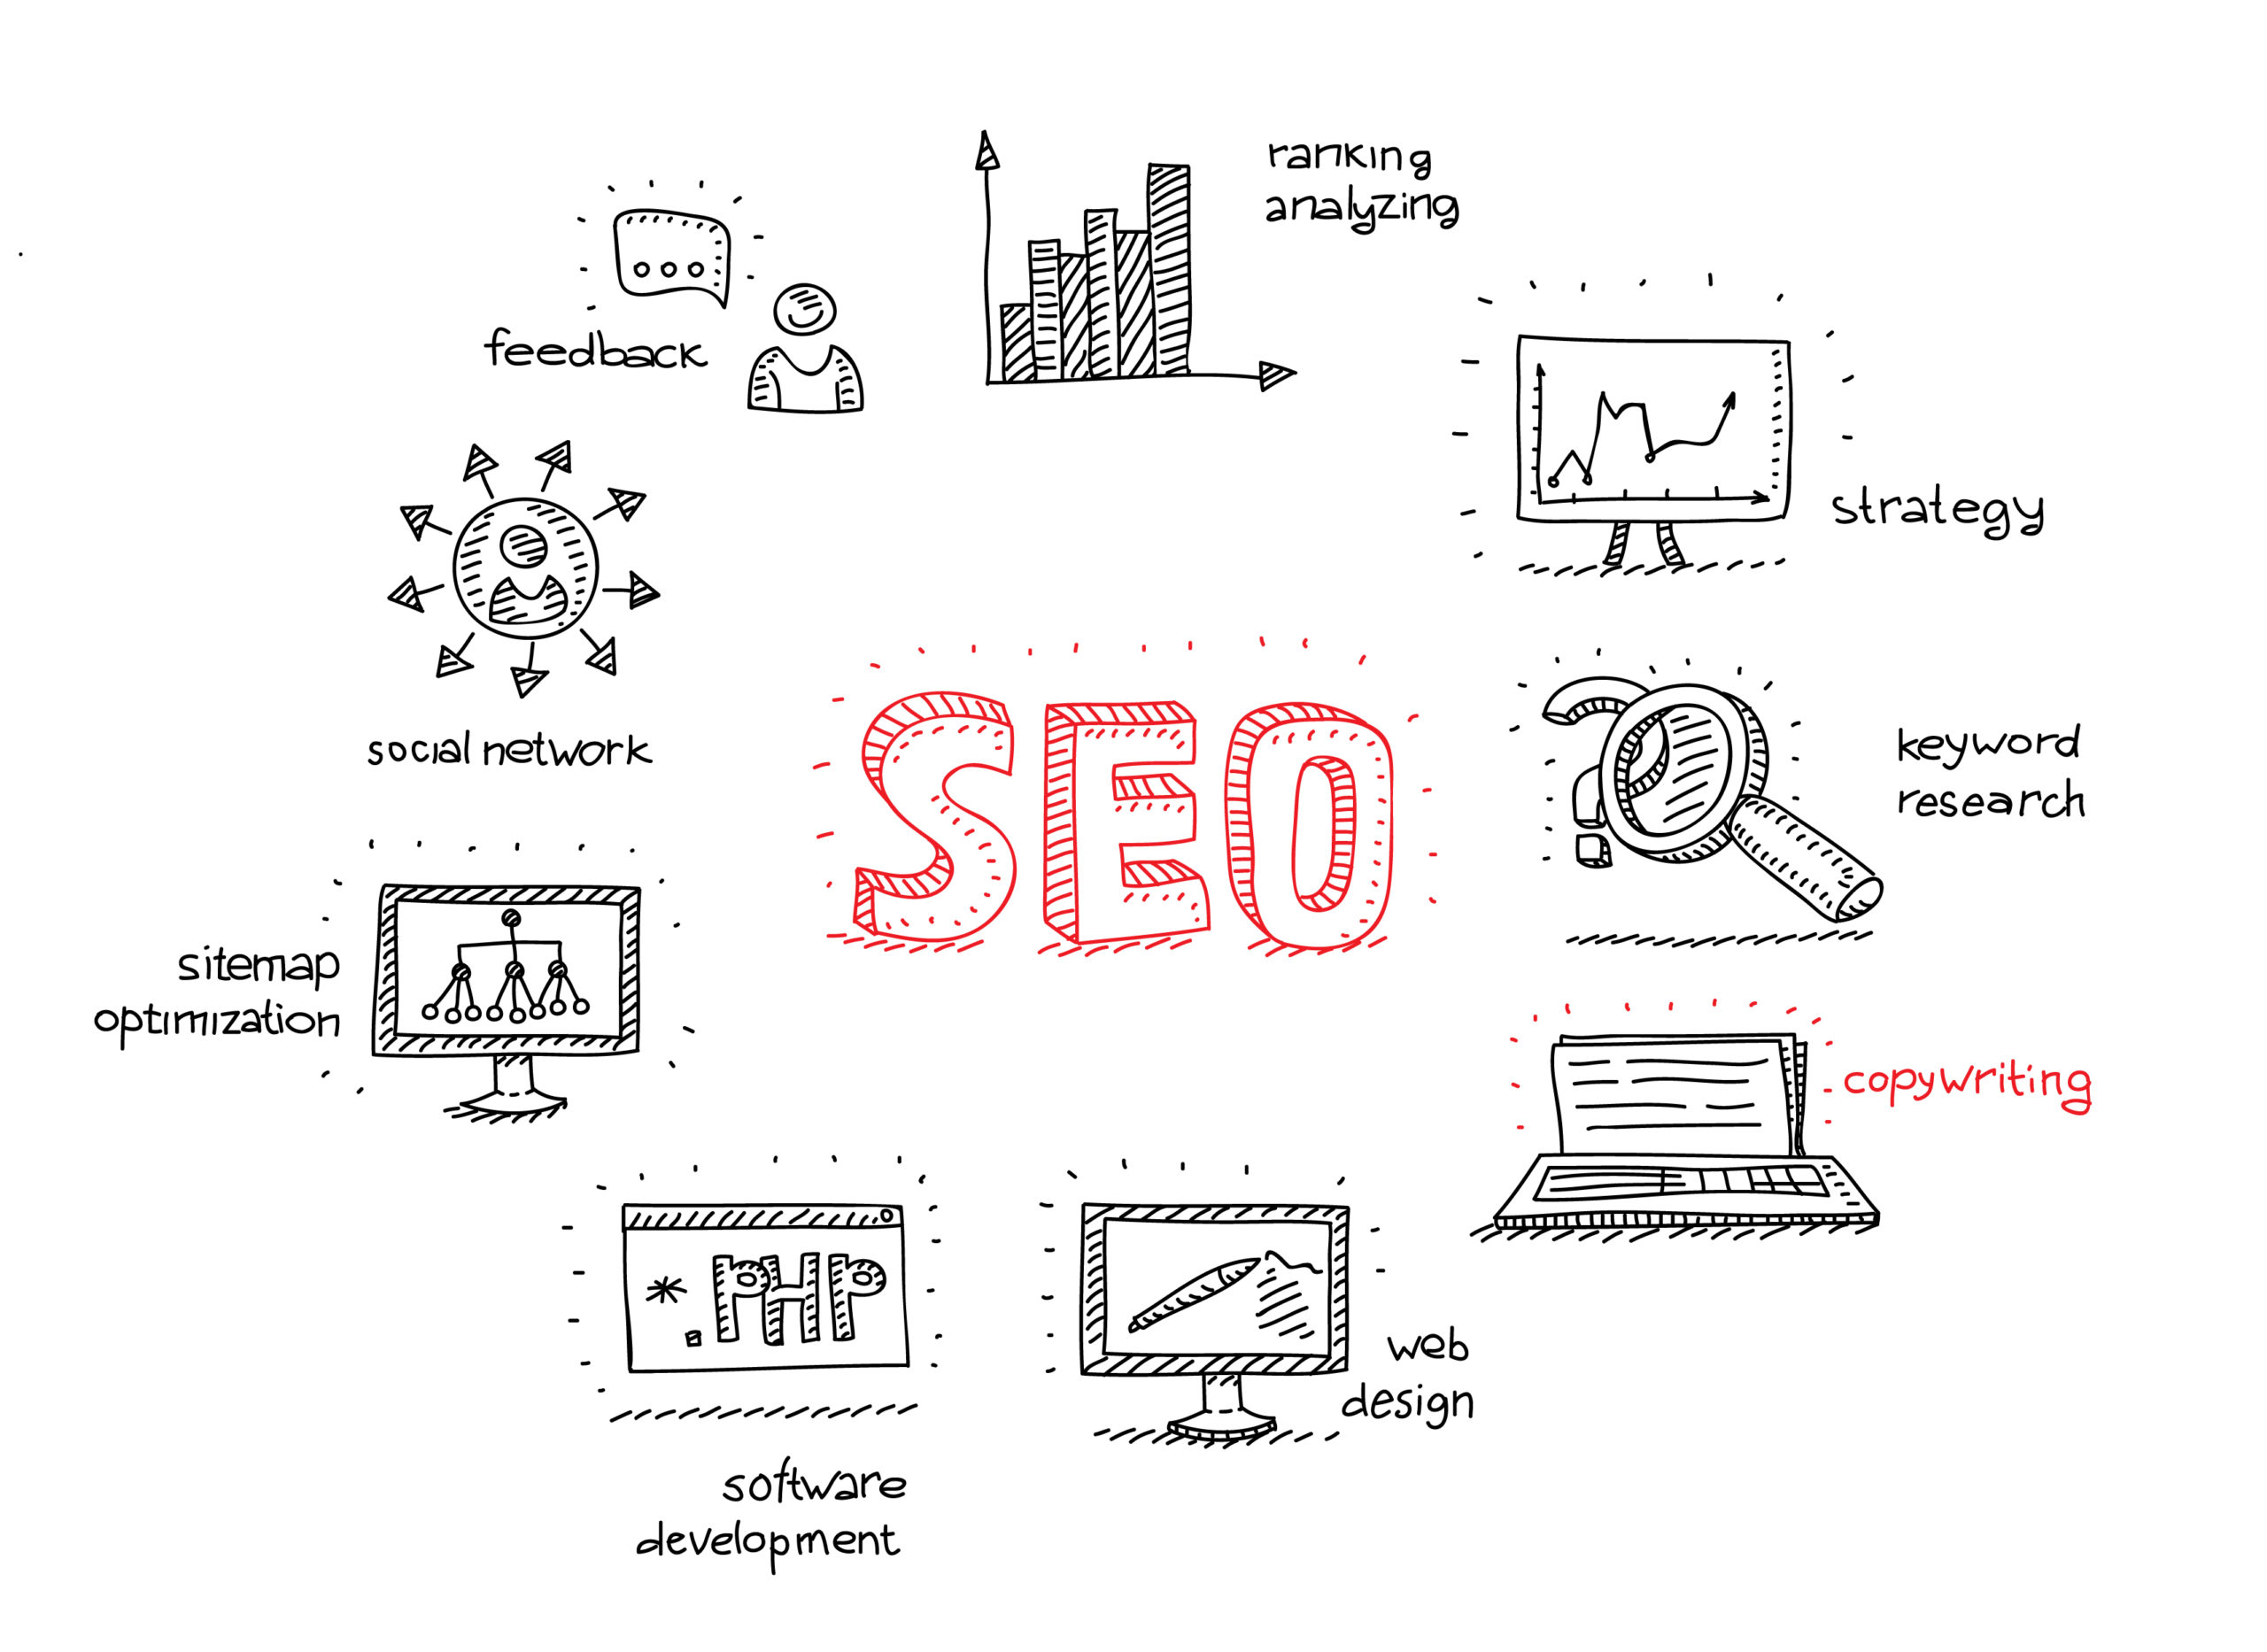 Drawing of SEO elements